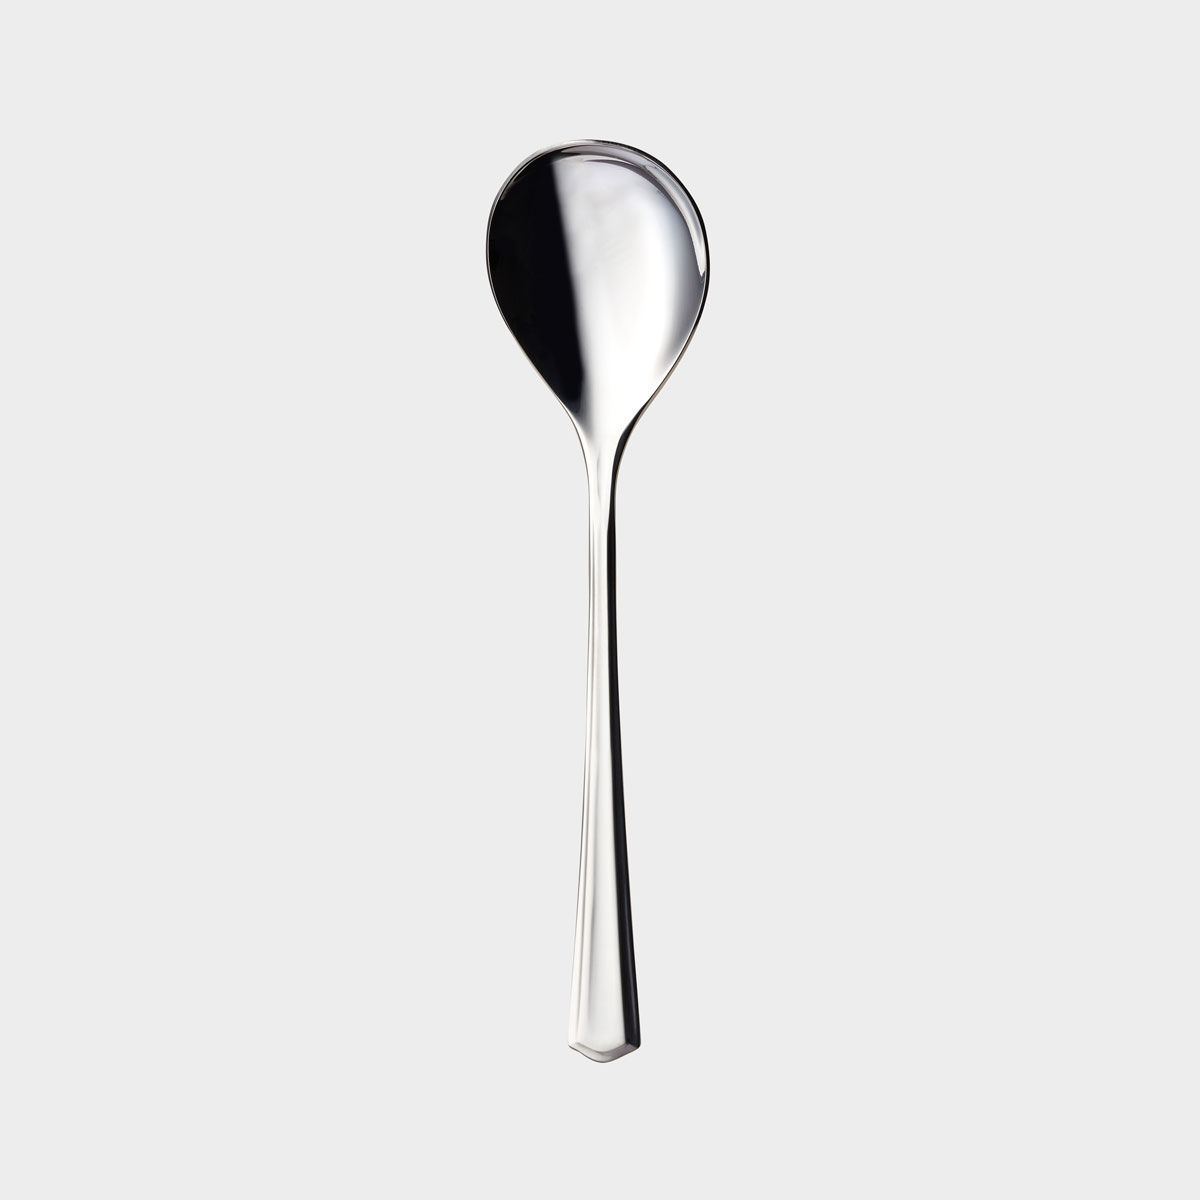 Mira serving spoon product image